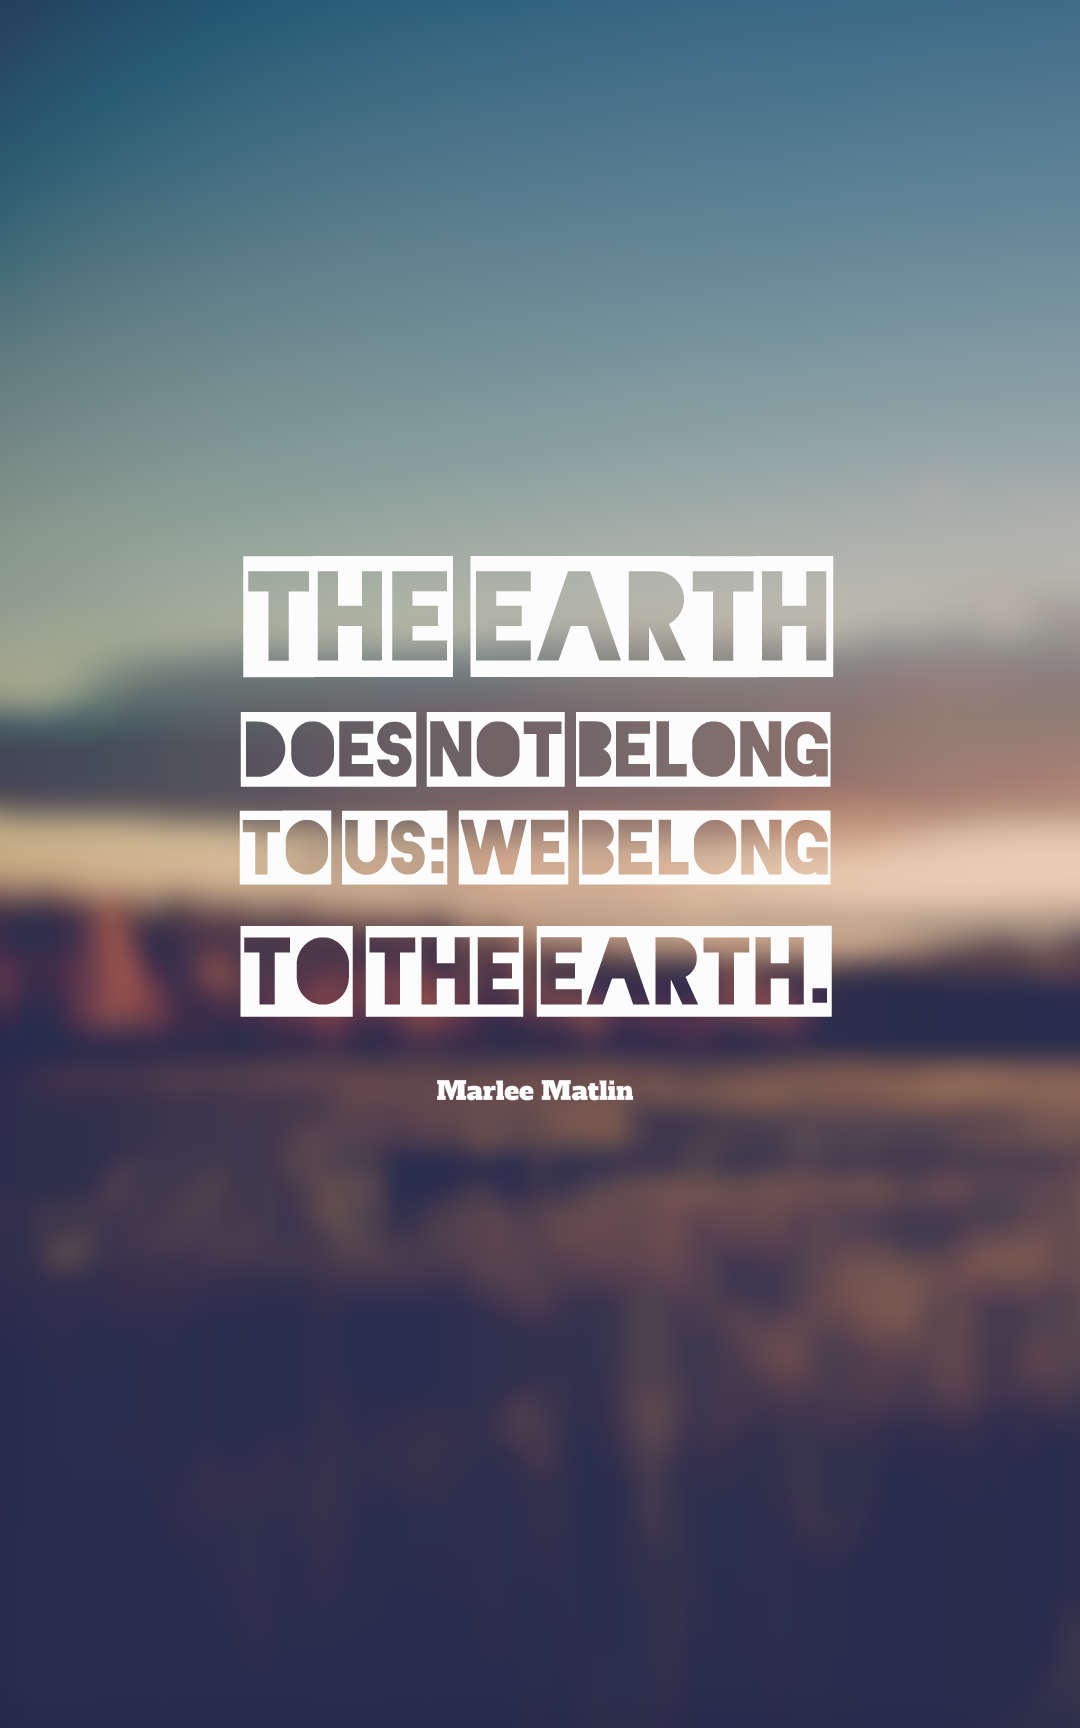 The Earth does not belong to us we belong to the Earth.